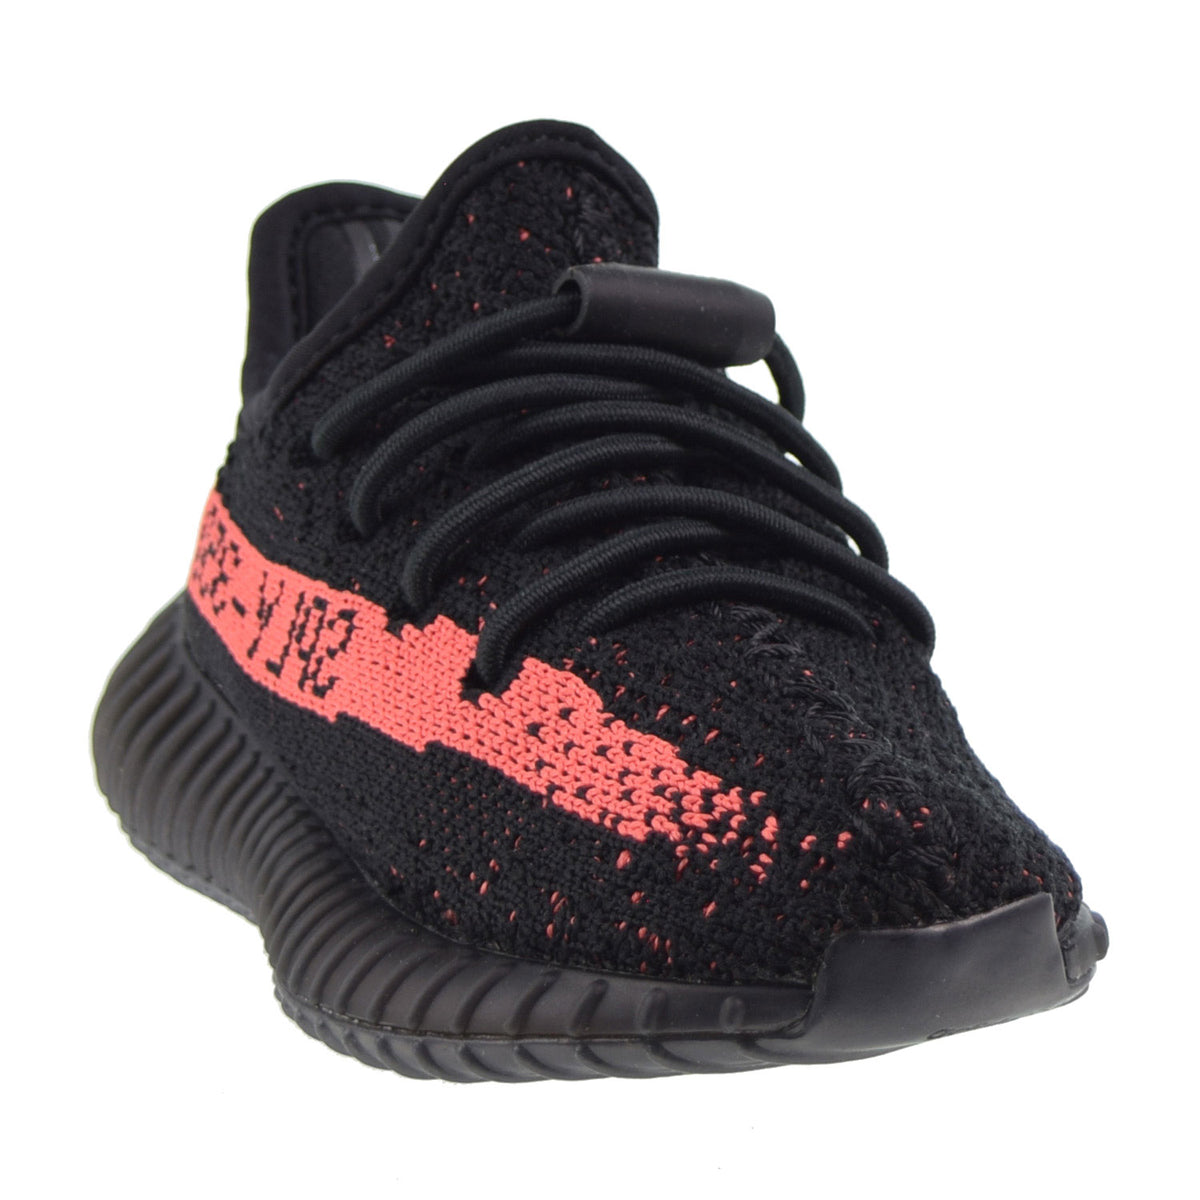 Adidas Yeezy Boost 350 V2 Core Black Team Red Athletic Shoes